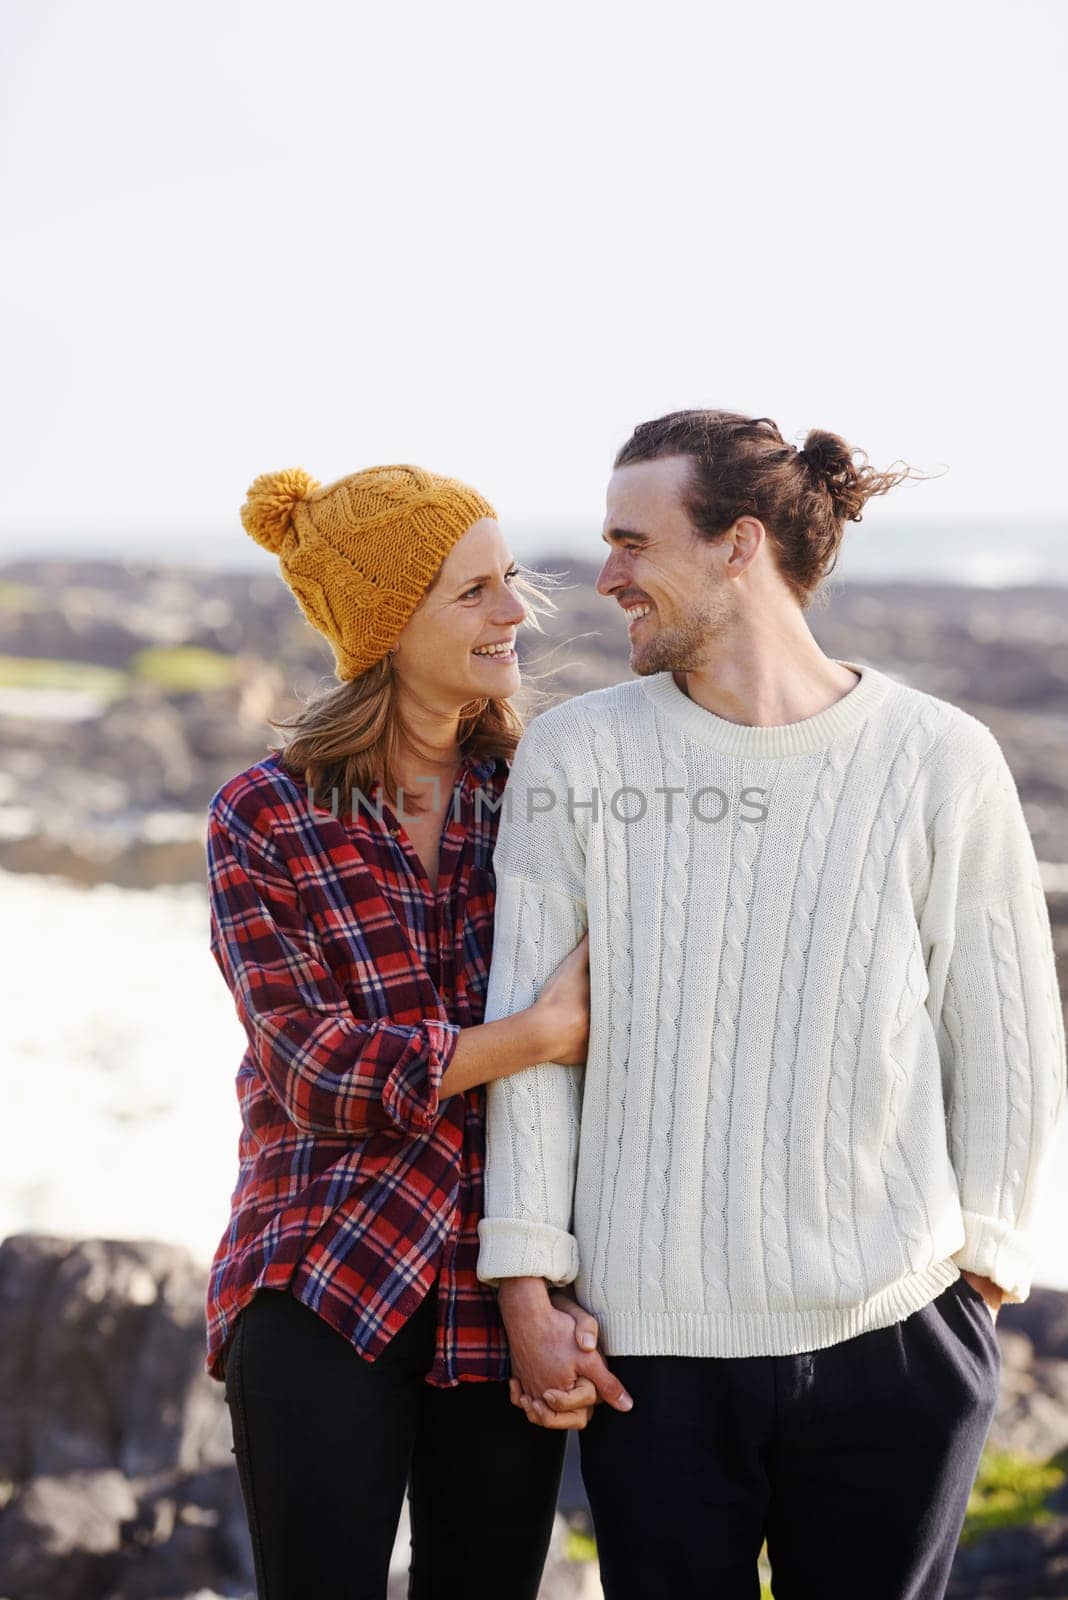 Hug, love and couple by ocean walking in winter for bonding, romantic relationship and relax outdoors. Nature, travel and happy man and woman by seaside for holiday, vacation and weekend together.